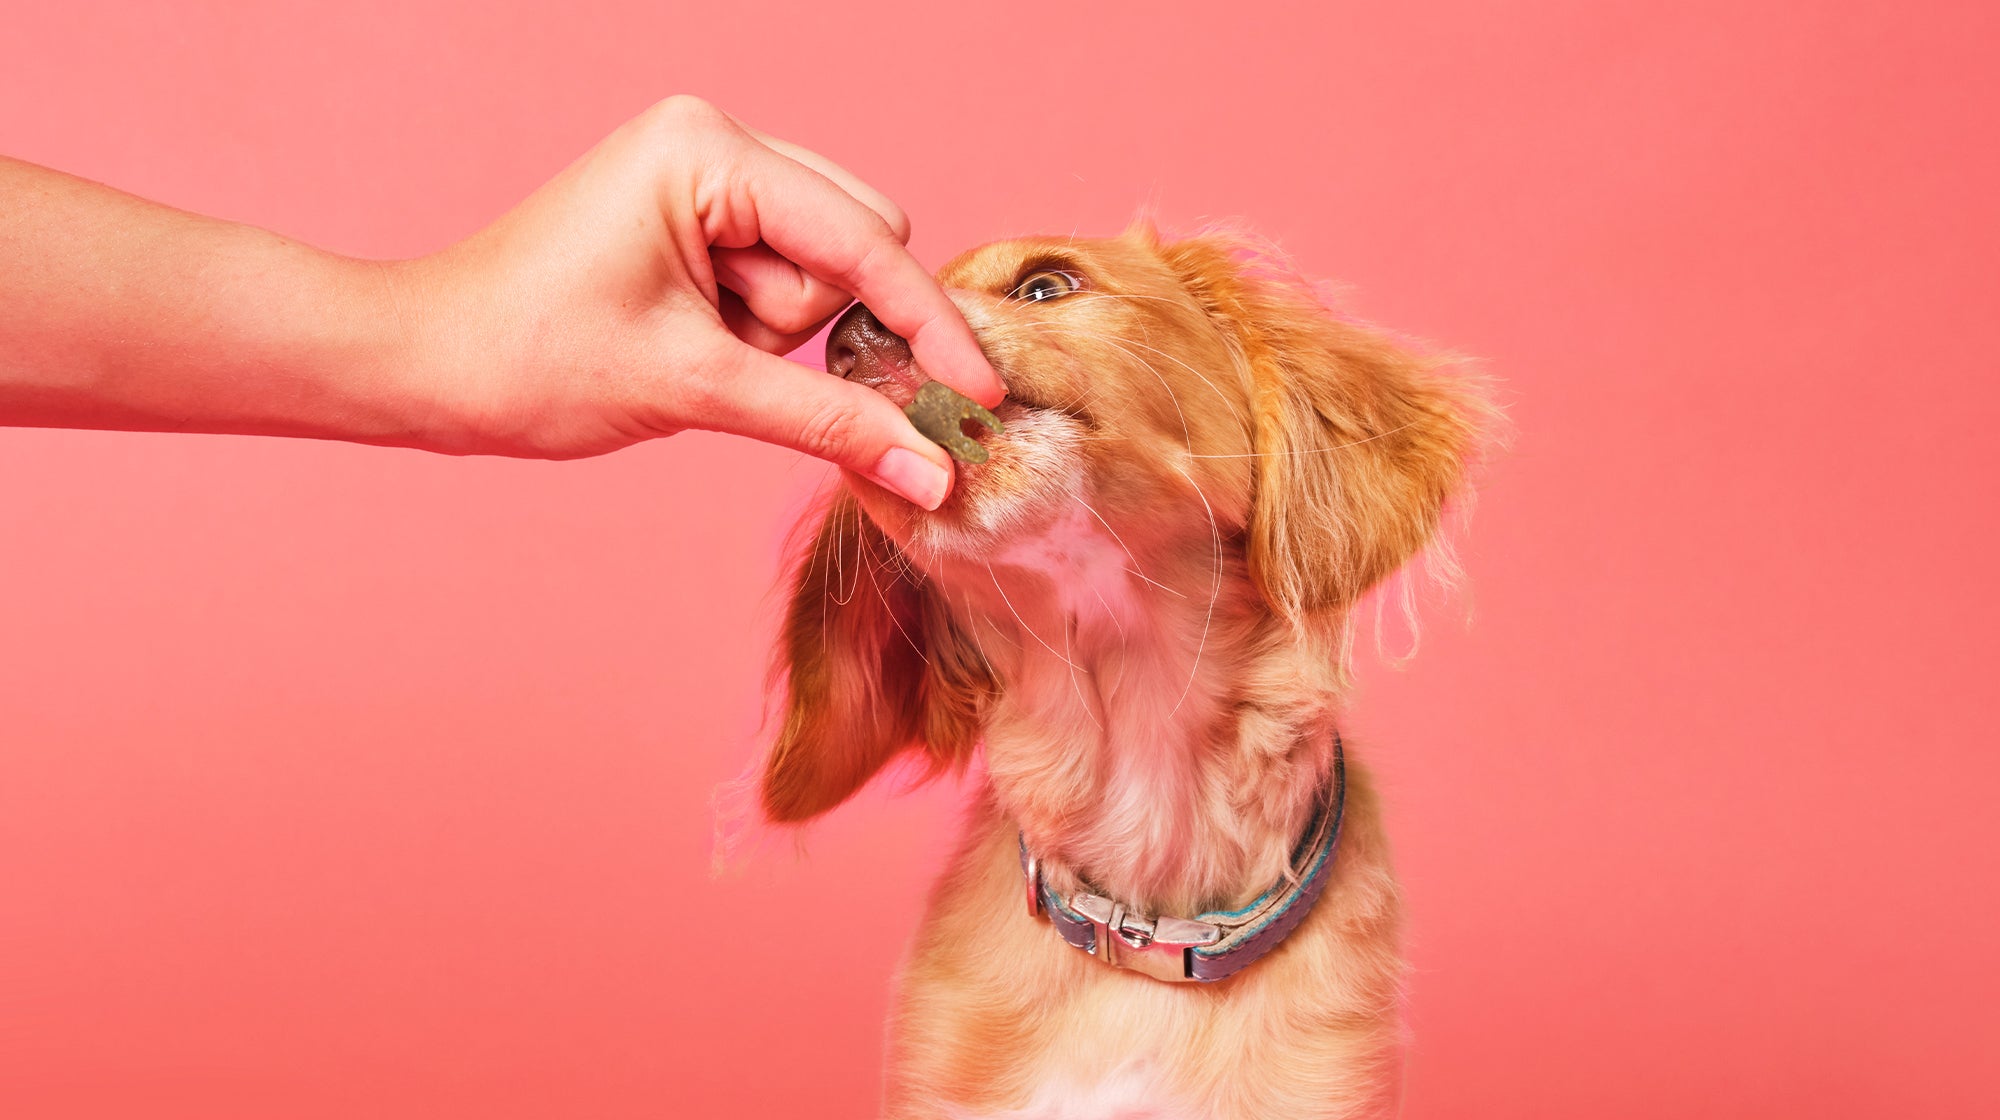 A golden coloured cocker-mix puppy, taking a treat, against a salmon pink coloured background